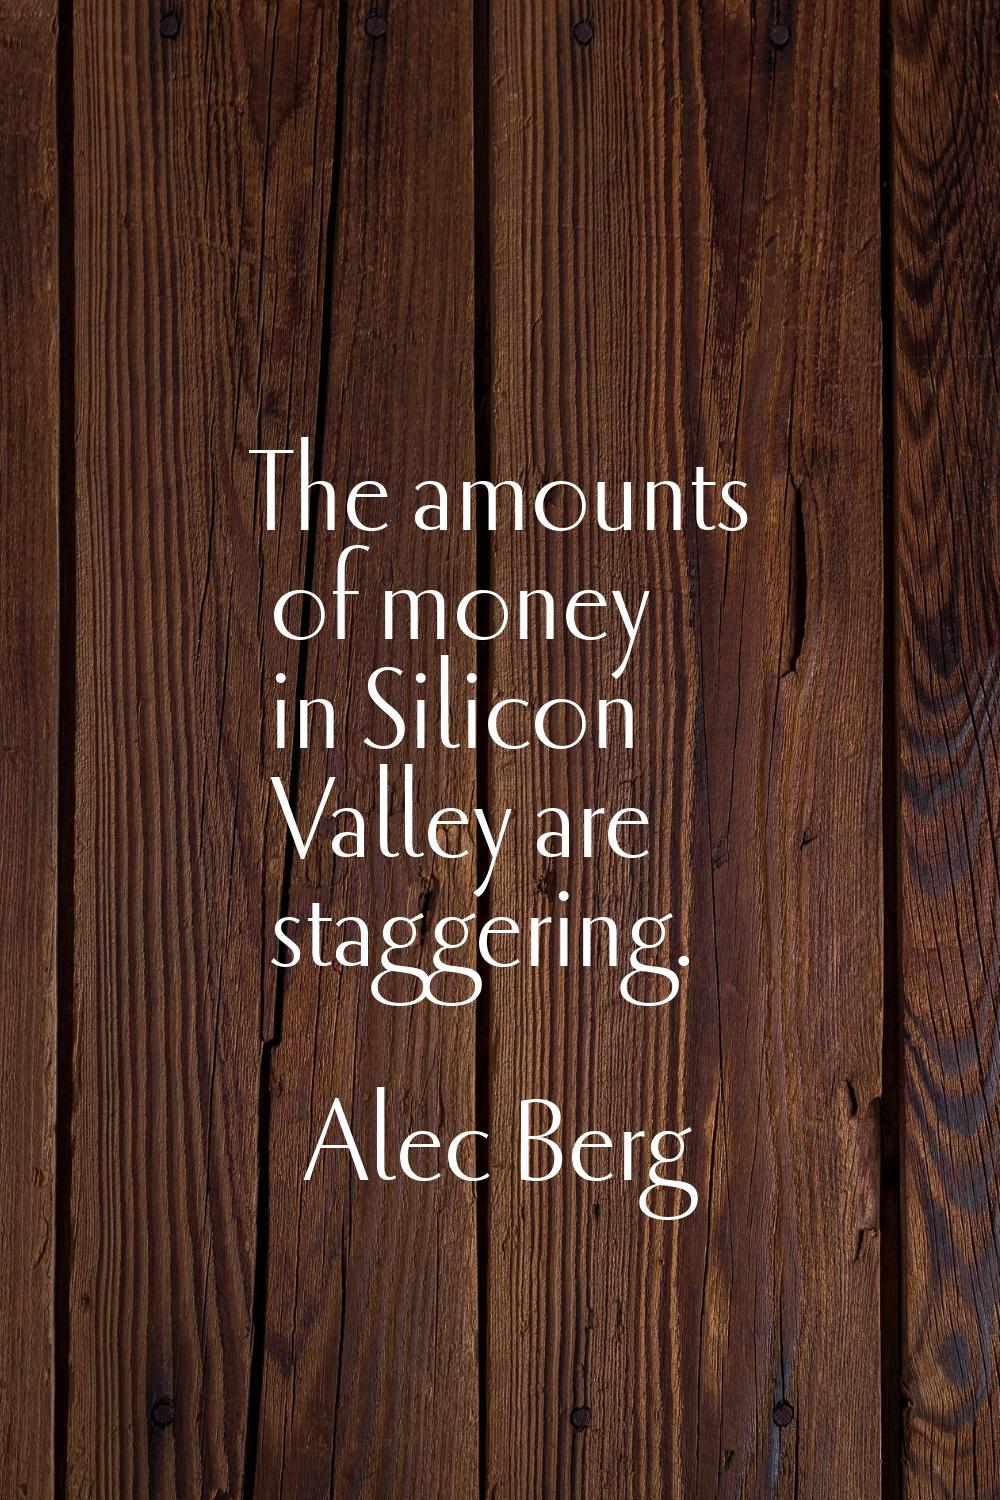 The amounts of money in Silicon Valley are staggering.